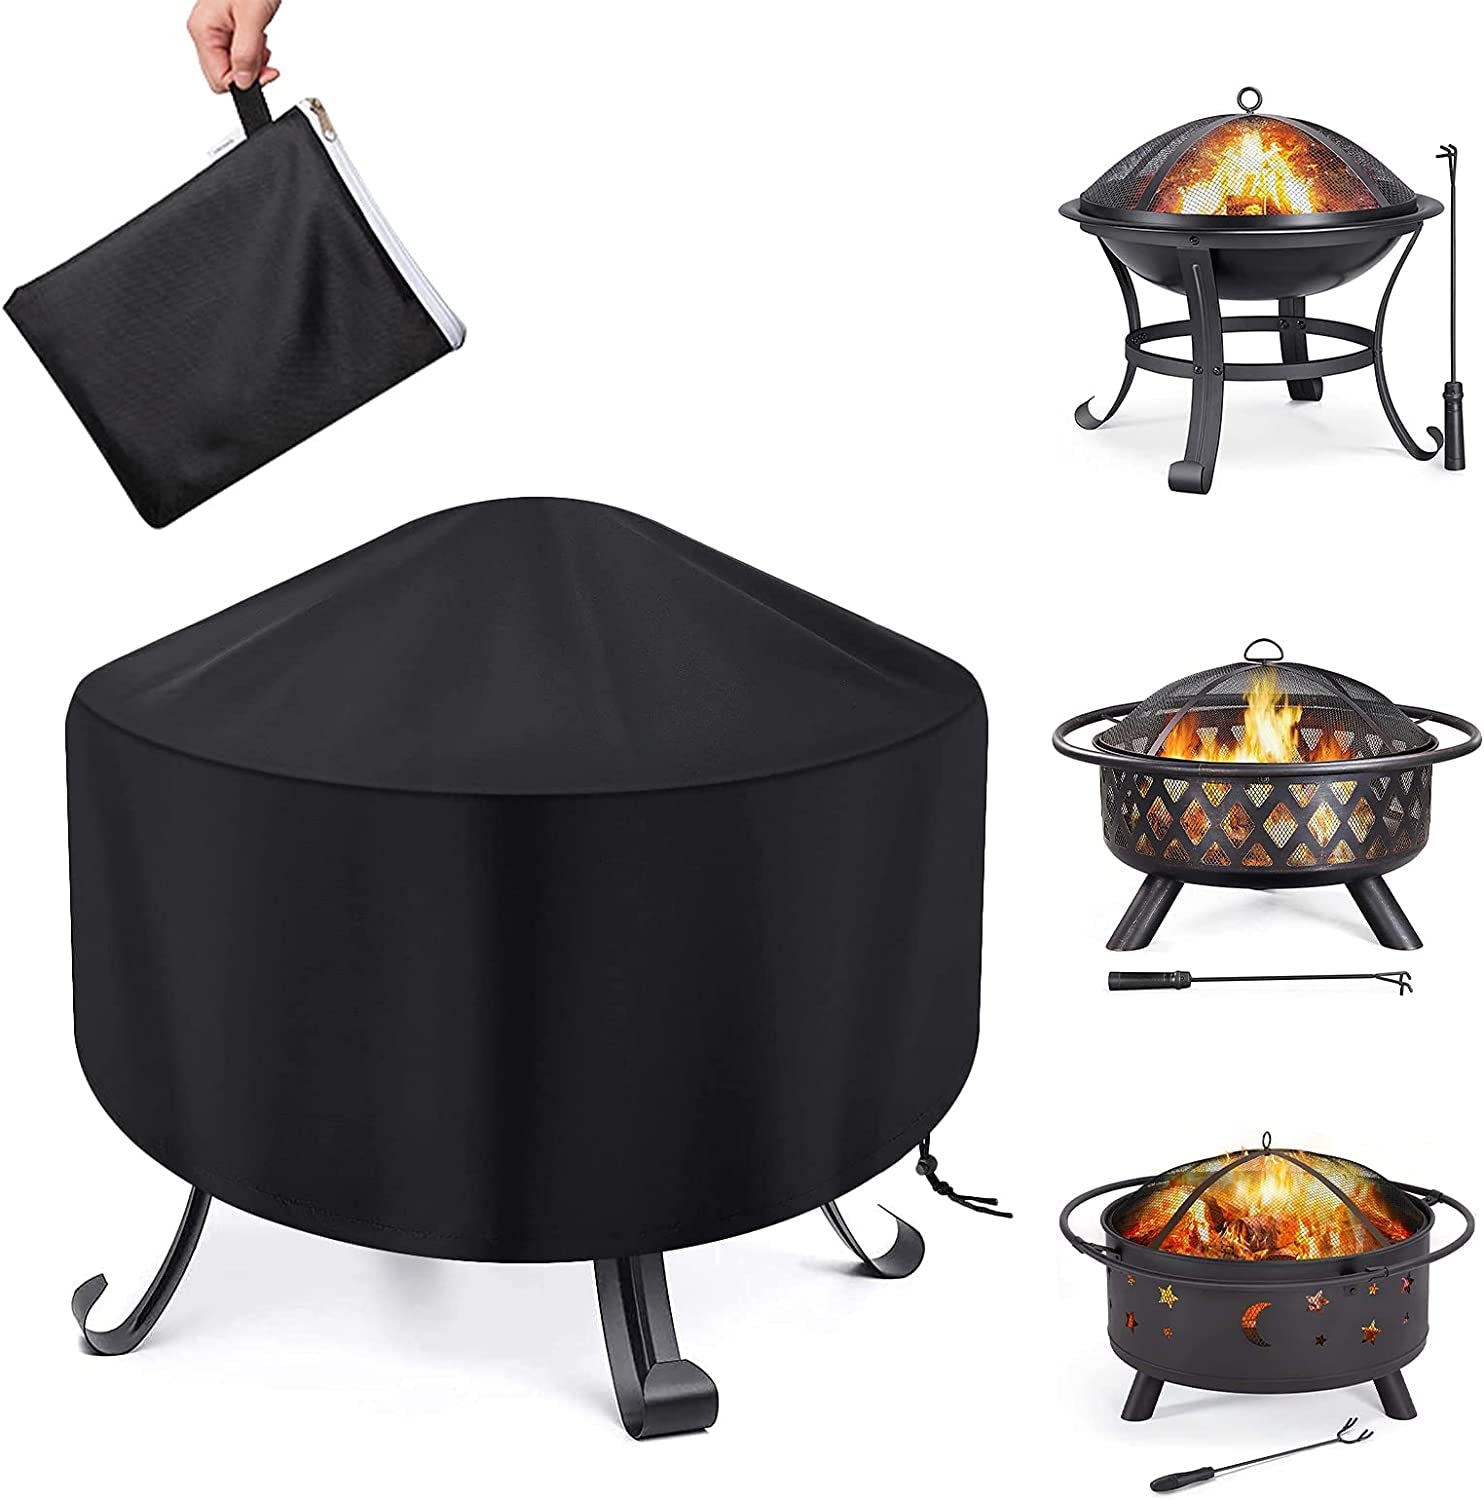 Croch, Fire Pit Cover round Waterproof Fit for 80/90/100Cm Outdoor round Firepit or Fire Bowl 420D Heavy Duty Firepit Cover, Black Patio Fire Bowl Cover